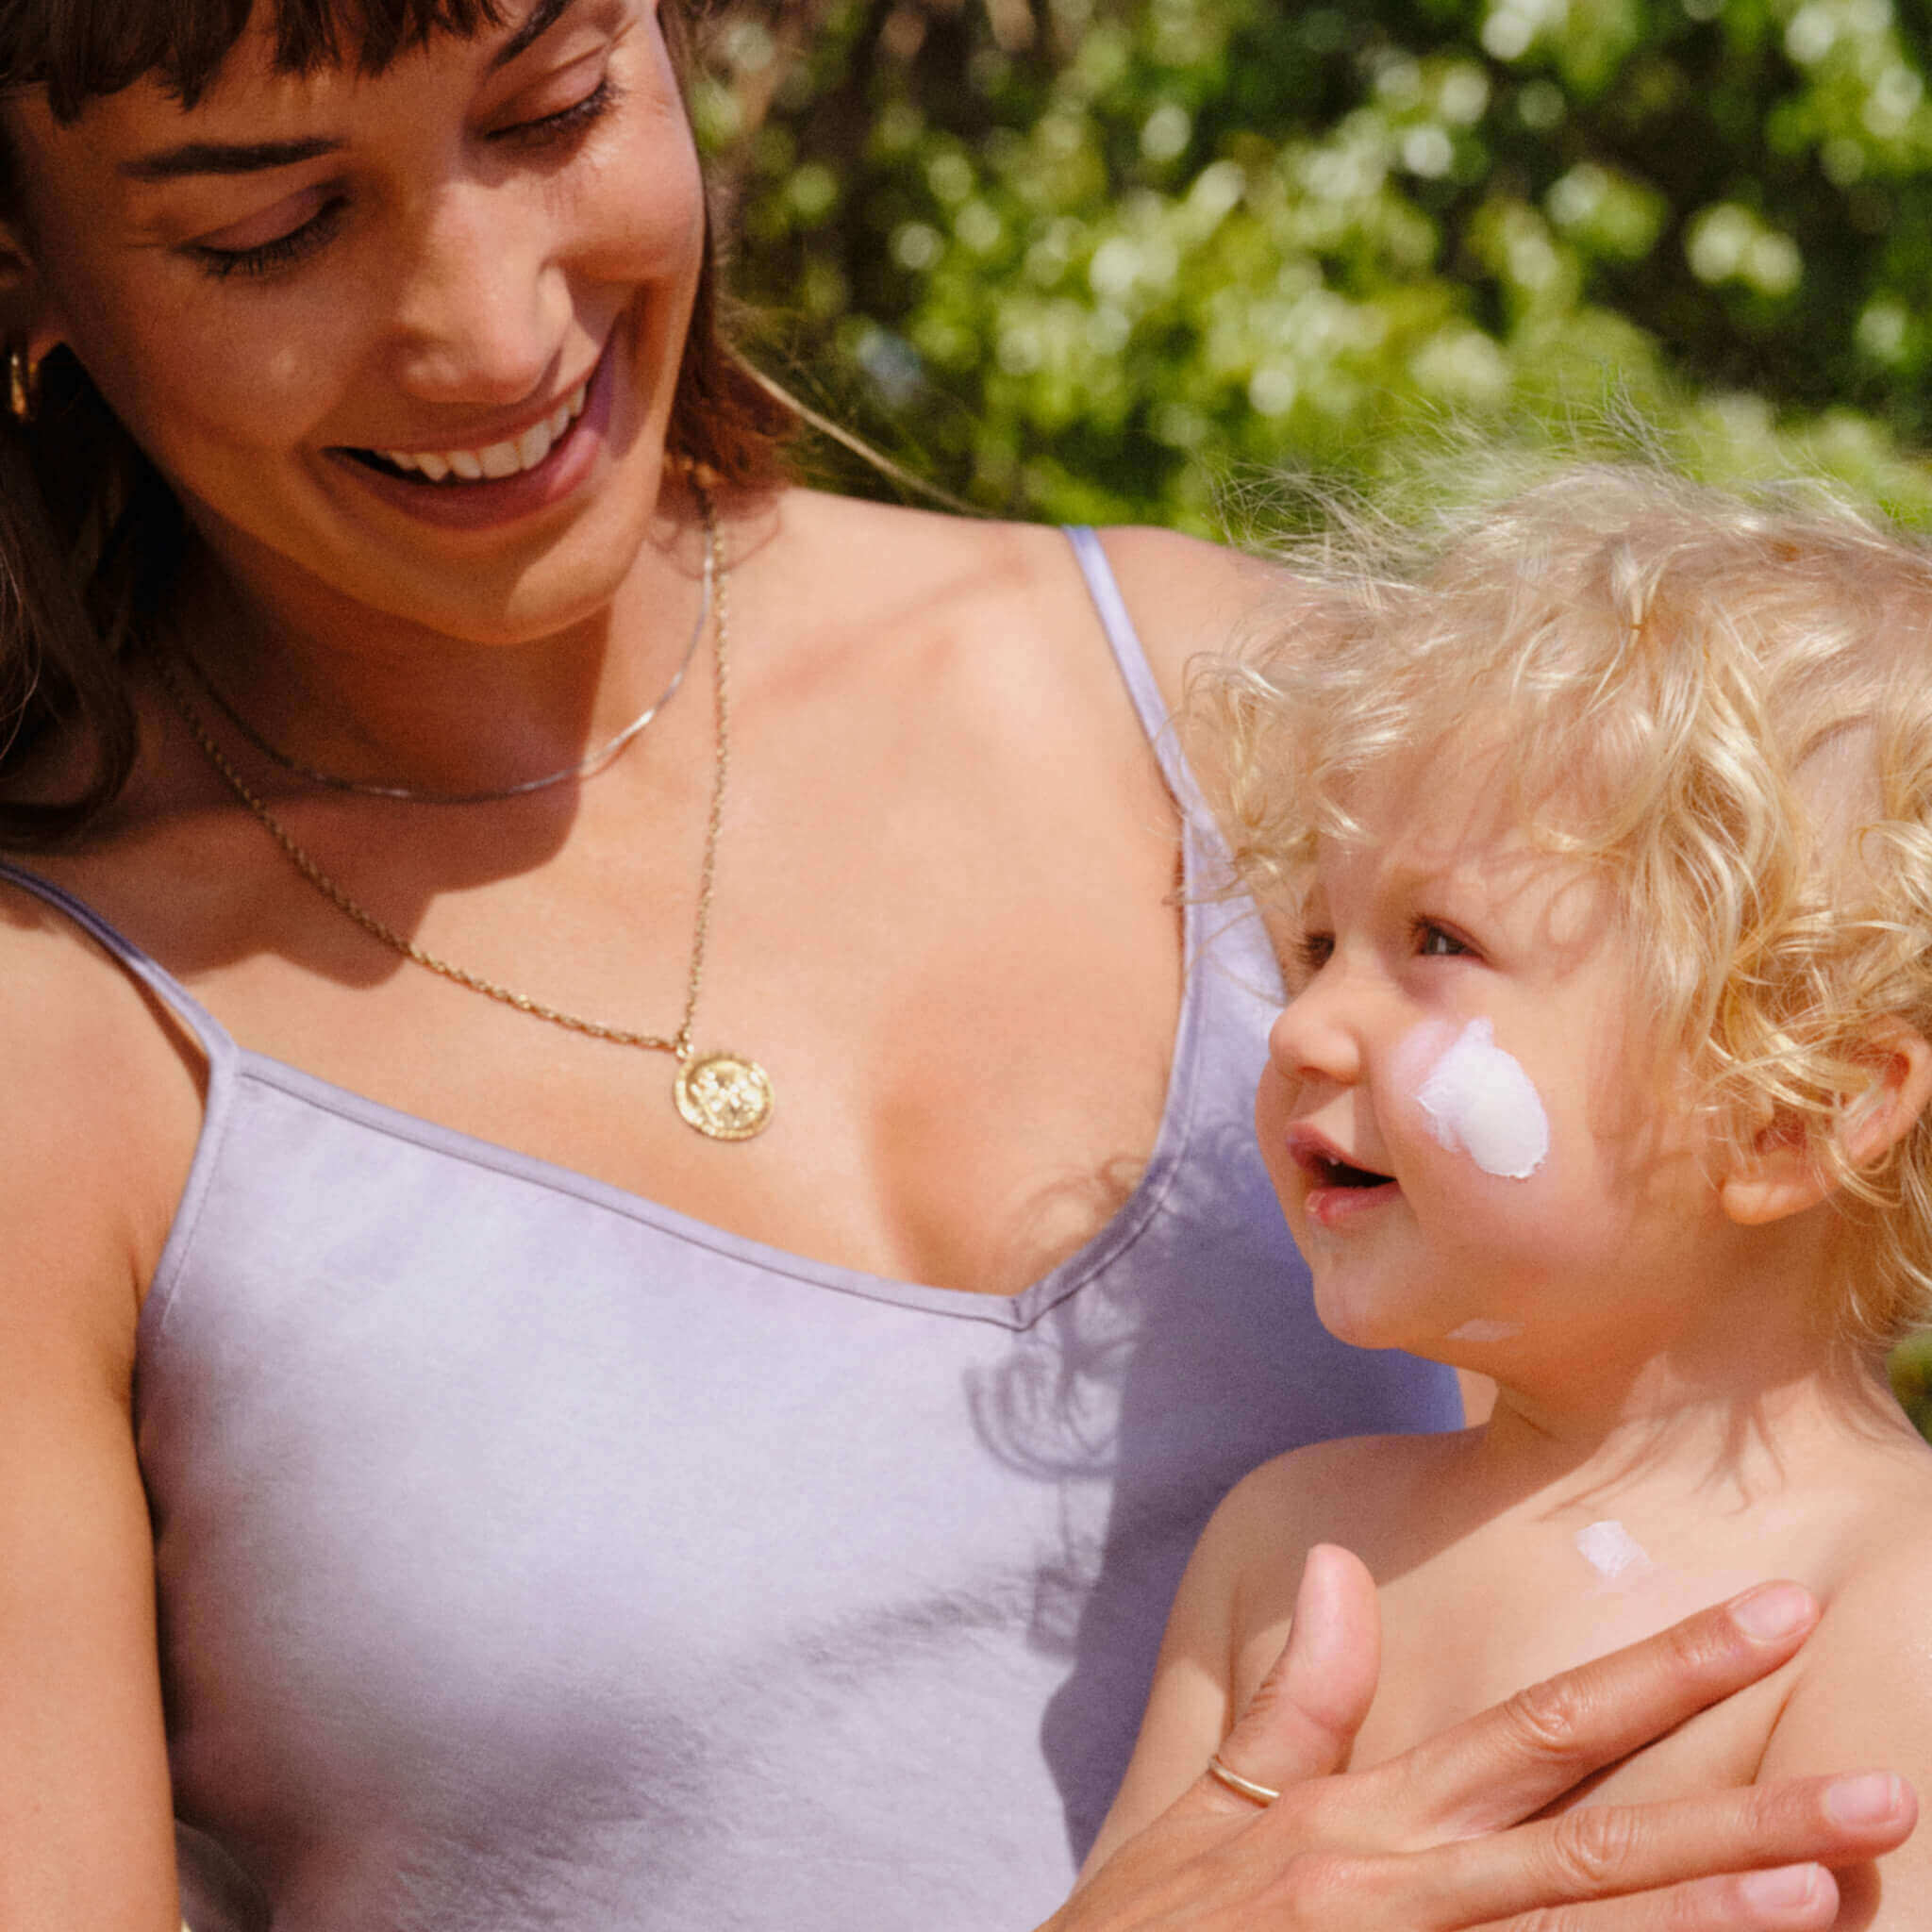 mother applying mineral sunscreen on her child